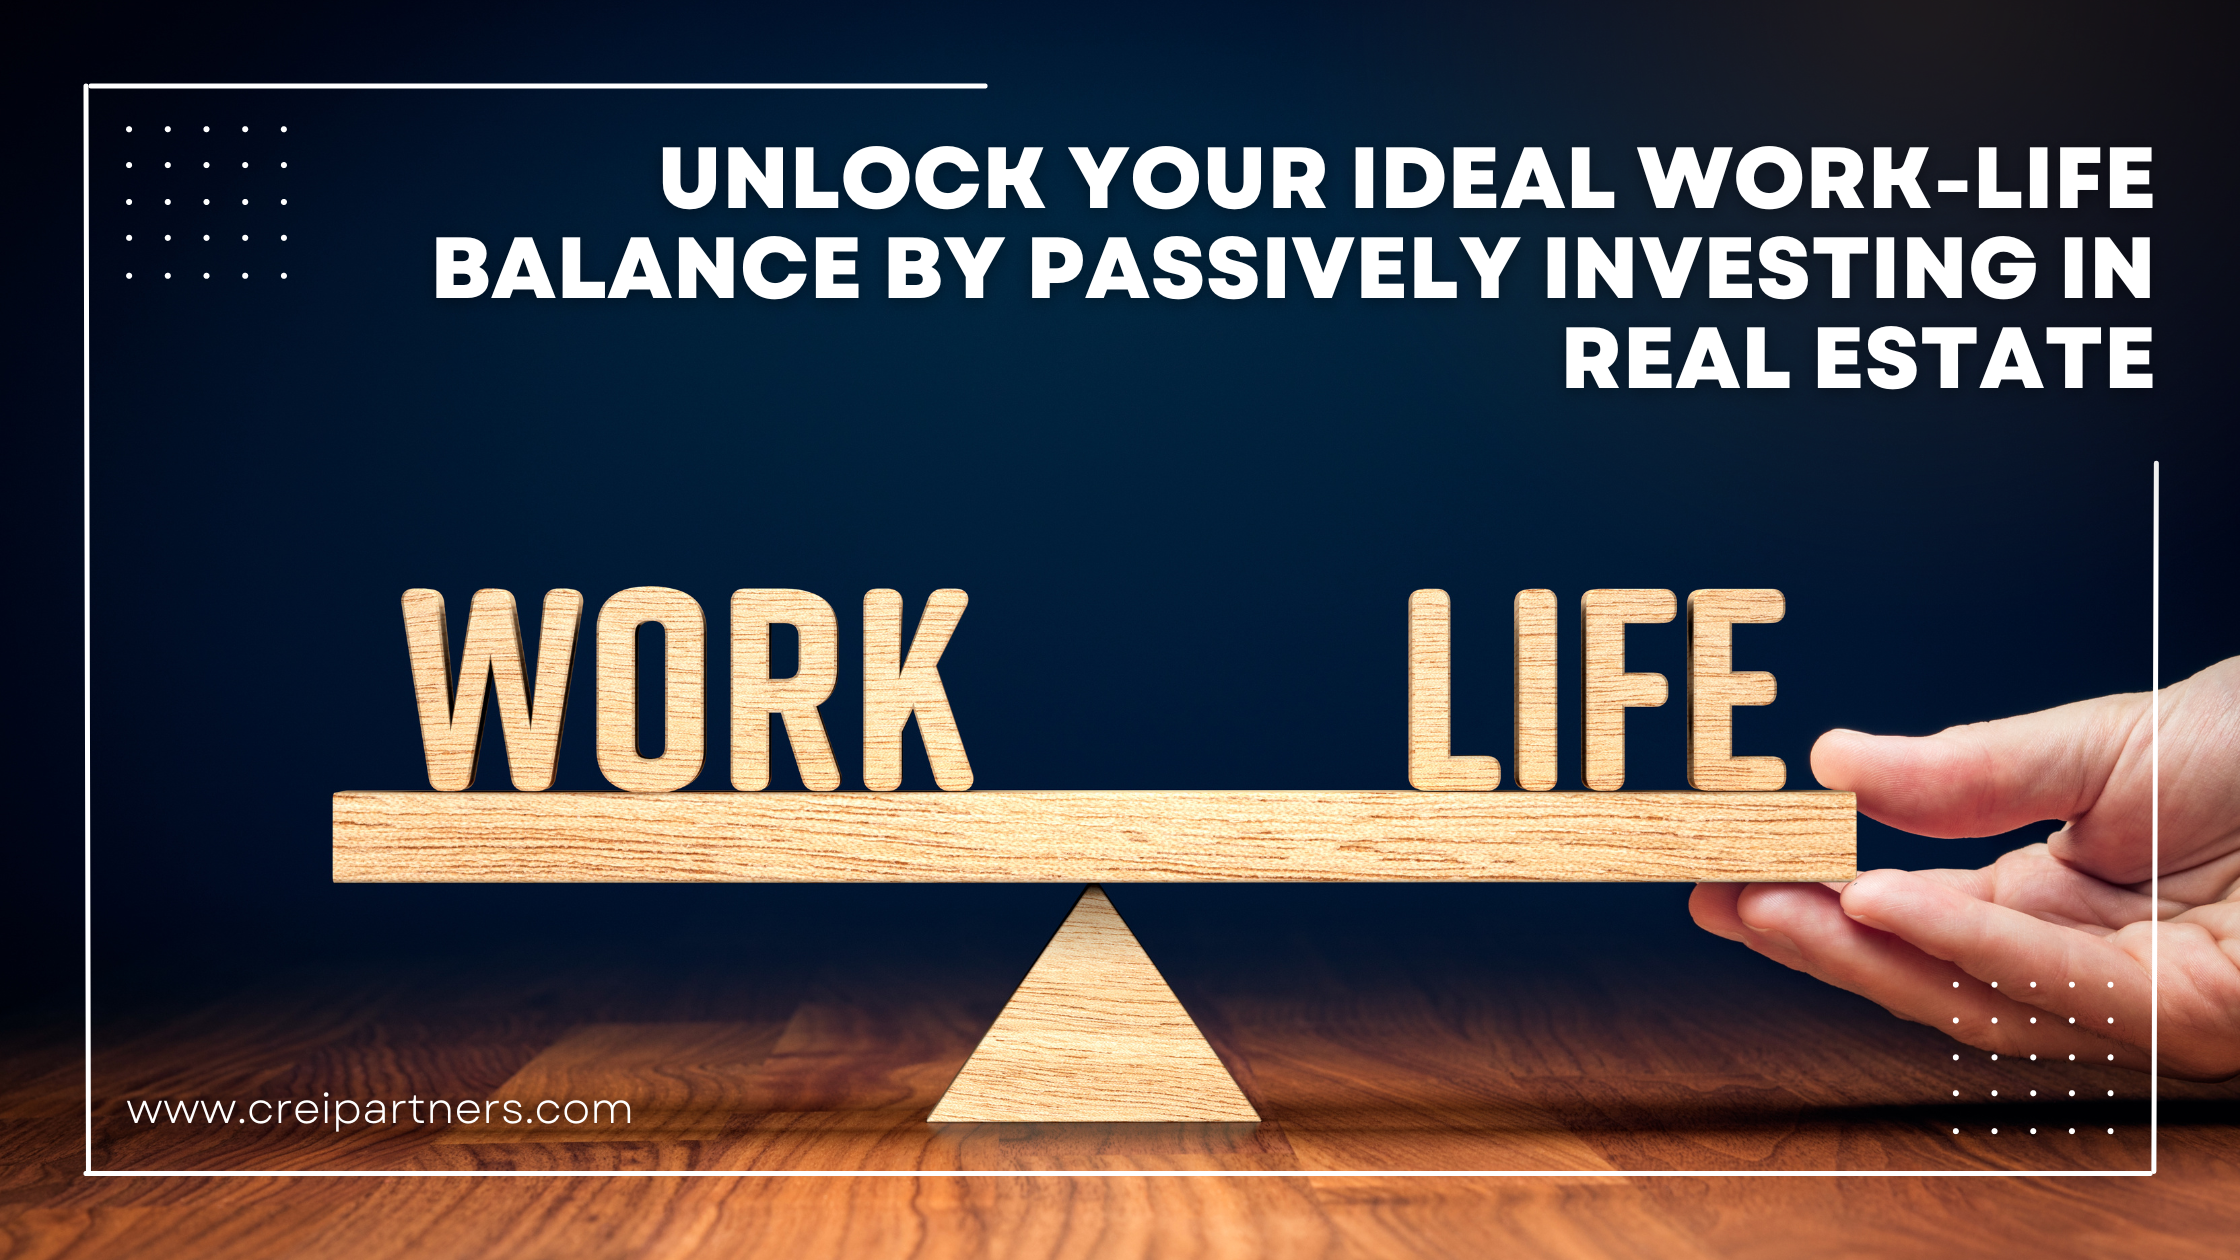 Unlock Your Ideal Work-Life Balance by Passively Investing in Real Estate